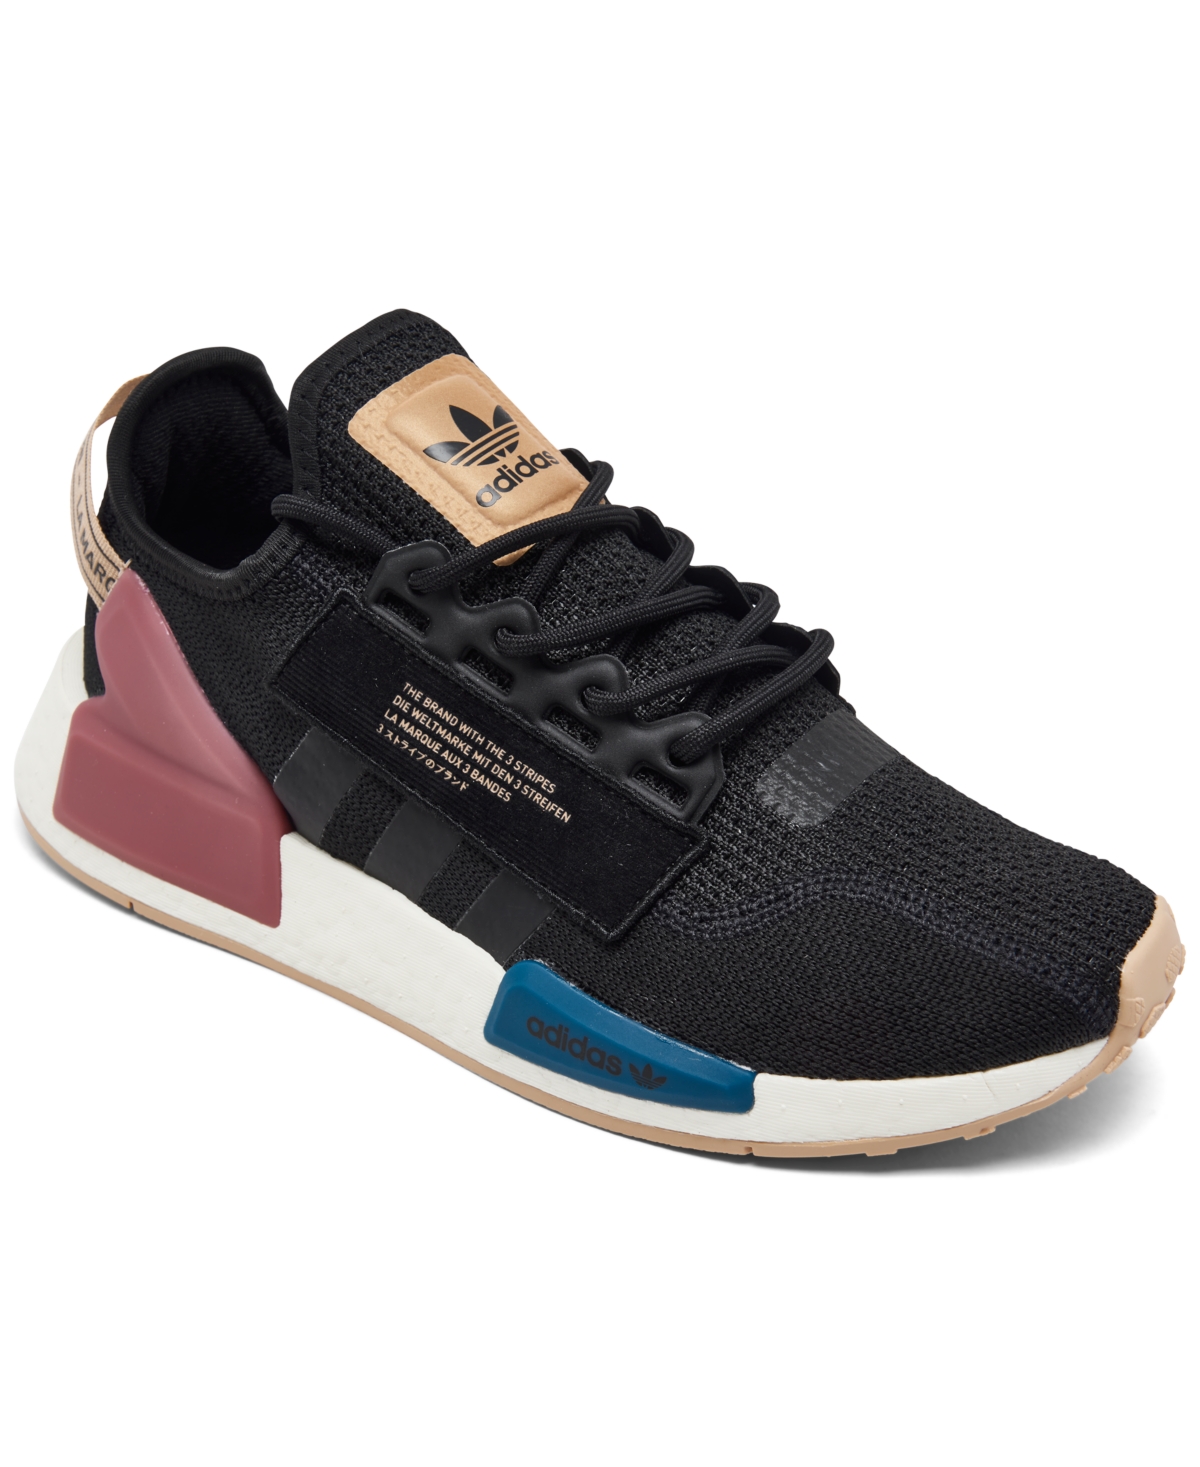 adidas Big Kids Nmd R1 V2 Casual Sneakers from Finish Line